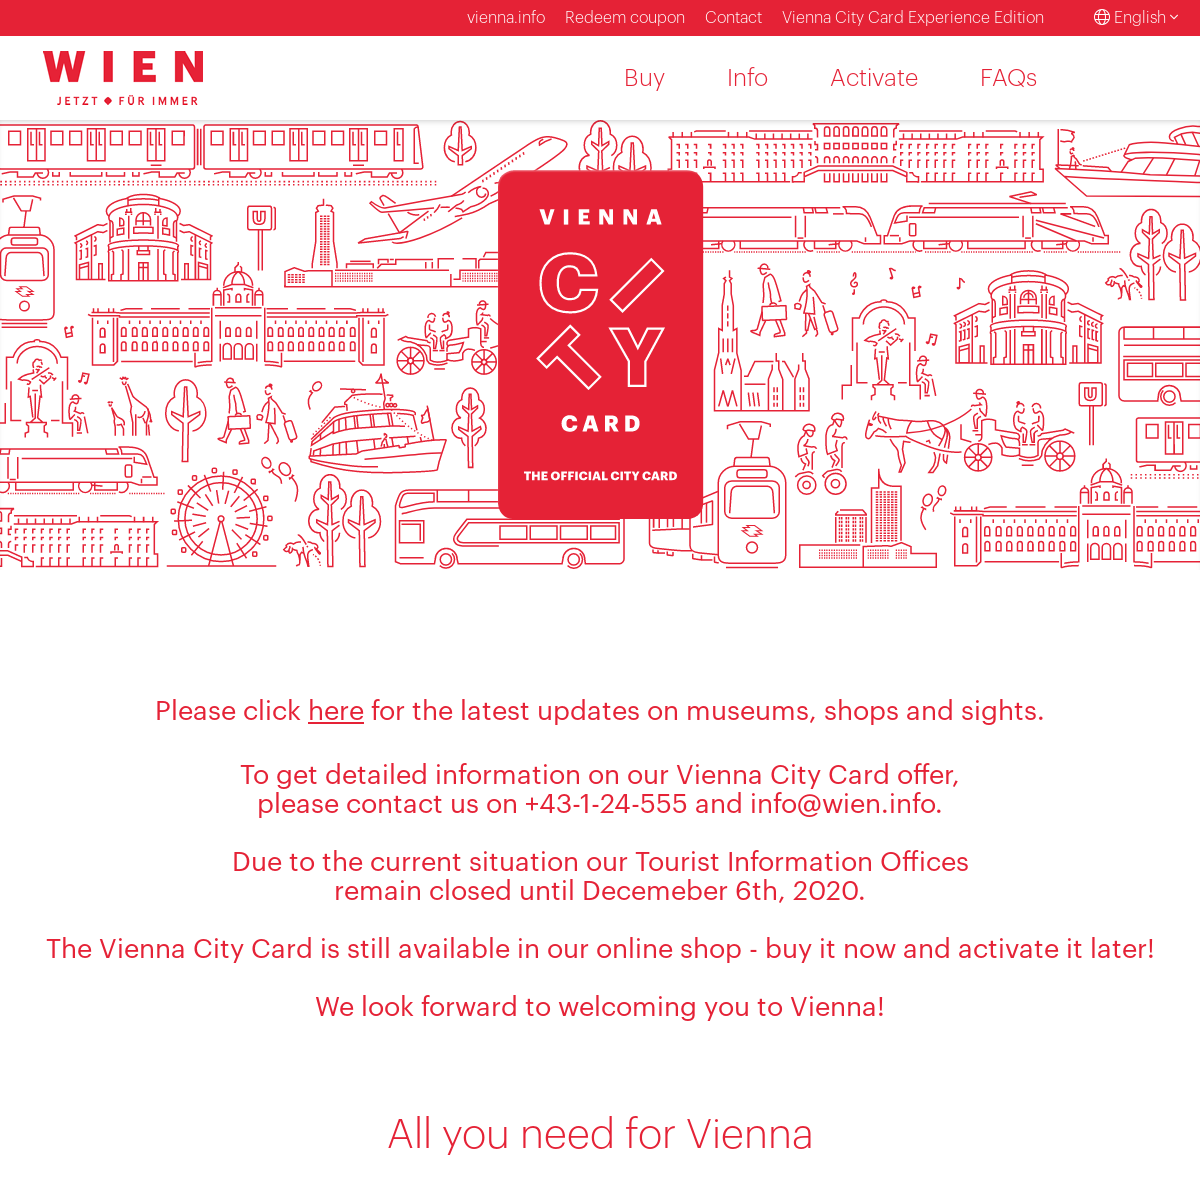 A complete backup of viennacitycard.at